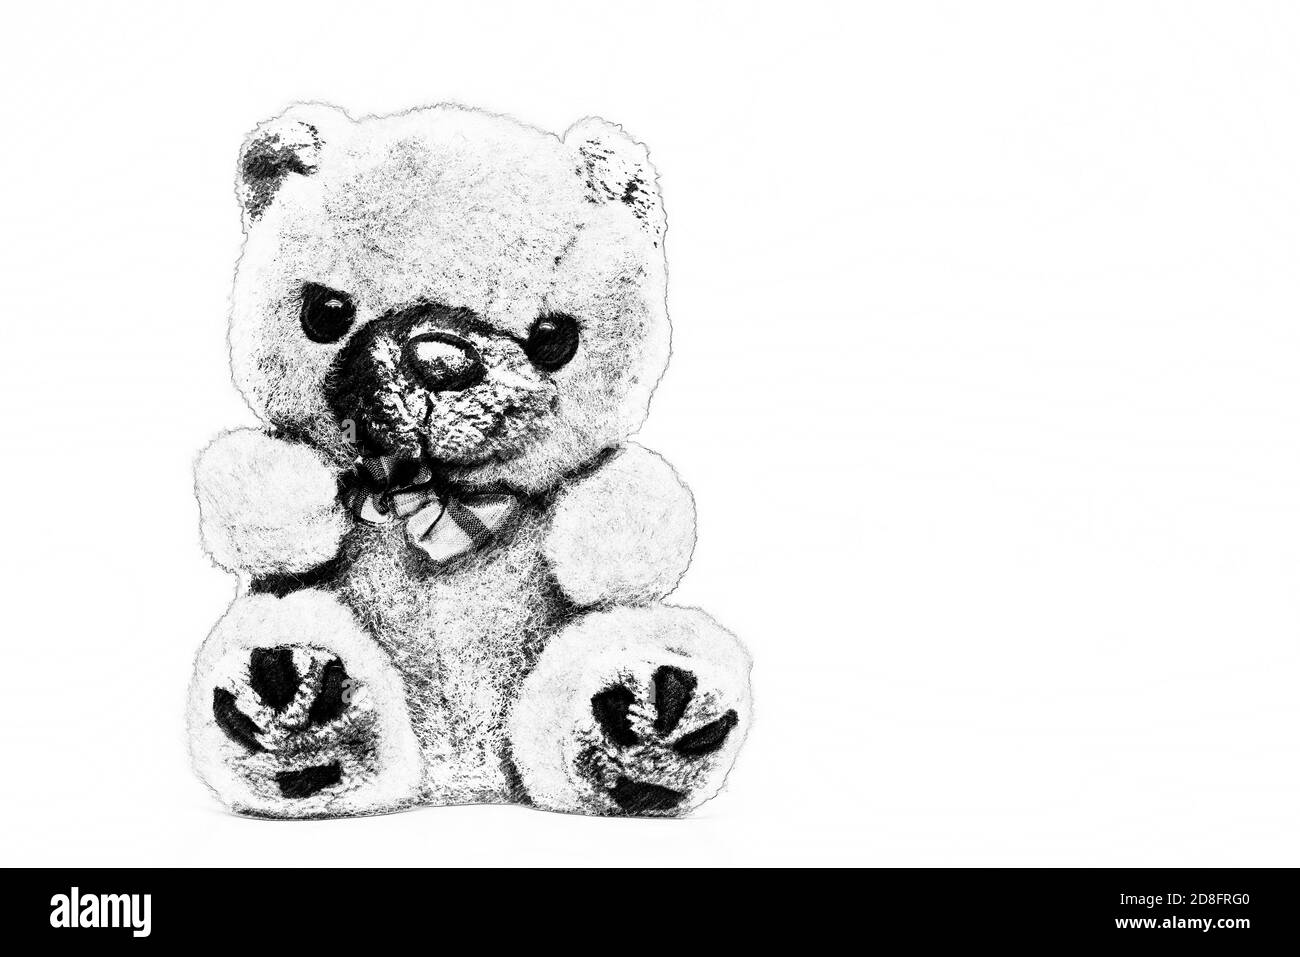 sketch of teddy bear on white background Stock Photo